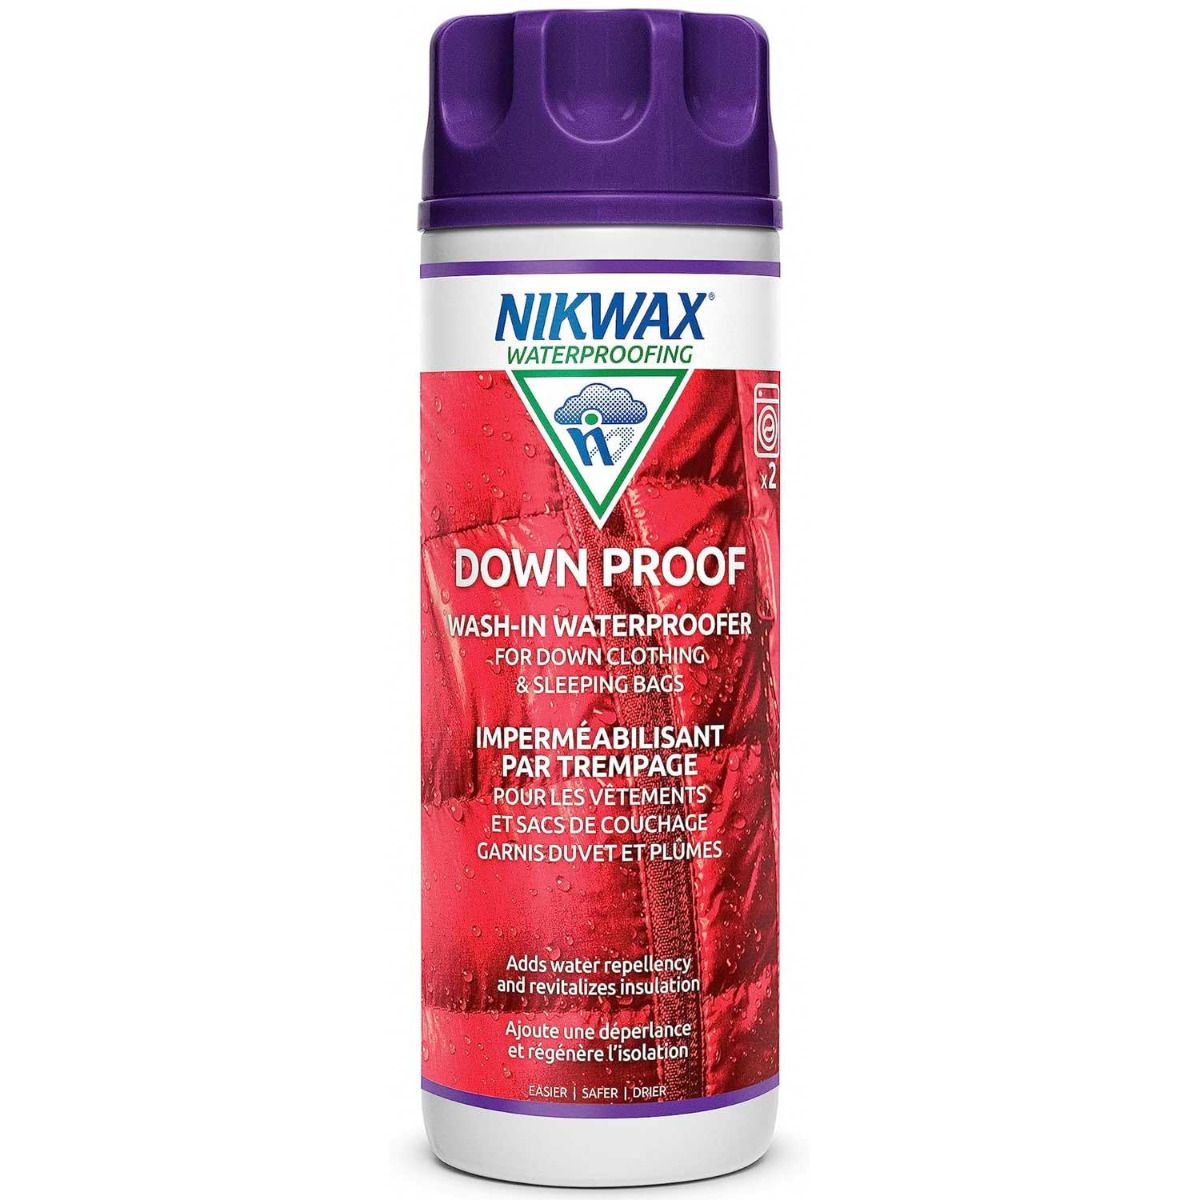 Nikwax Down Proof Wash-In Waterproofing Restores DWR Water Repellency to  Down Filled Jackets, Outerwear, Vests, Sleeping Bags, Quilts, and Bedding